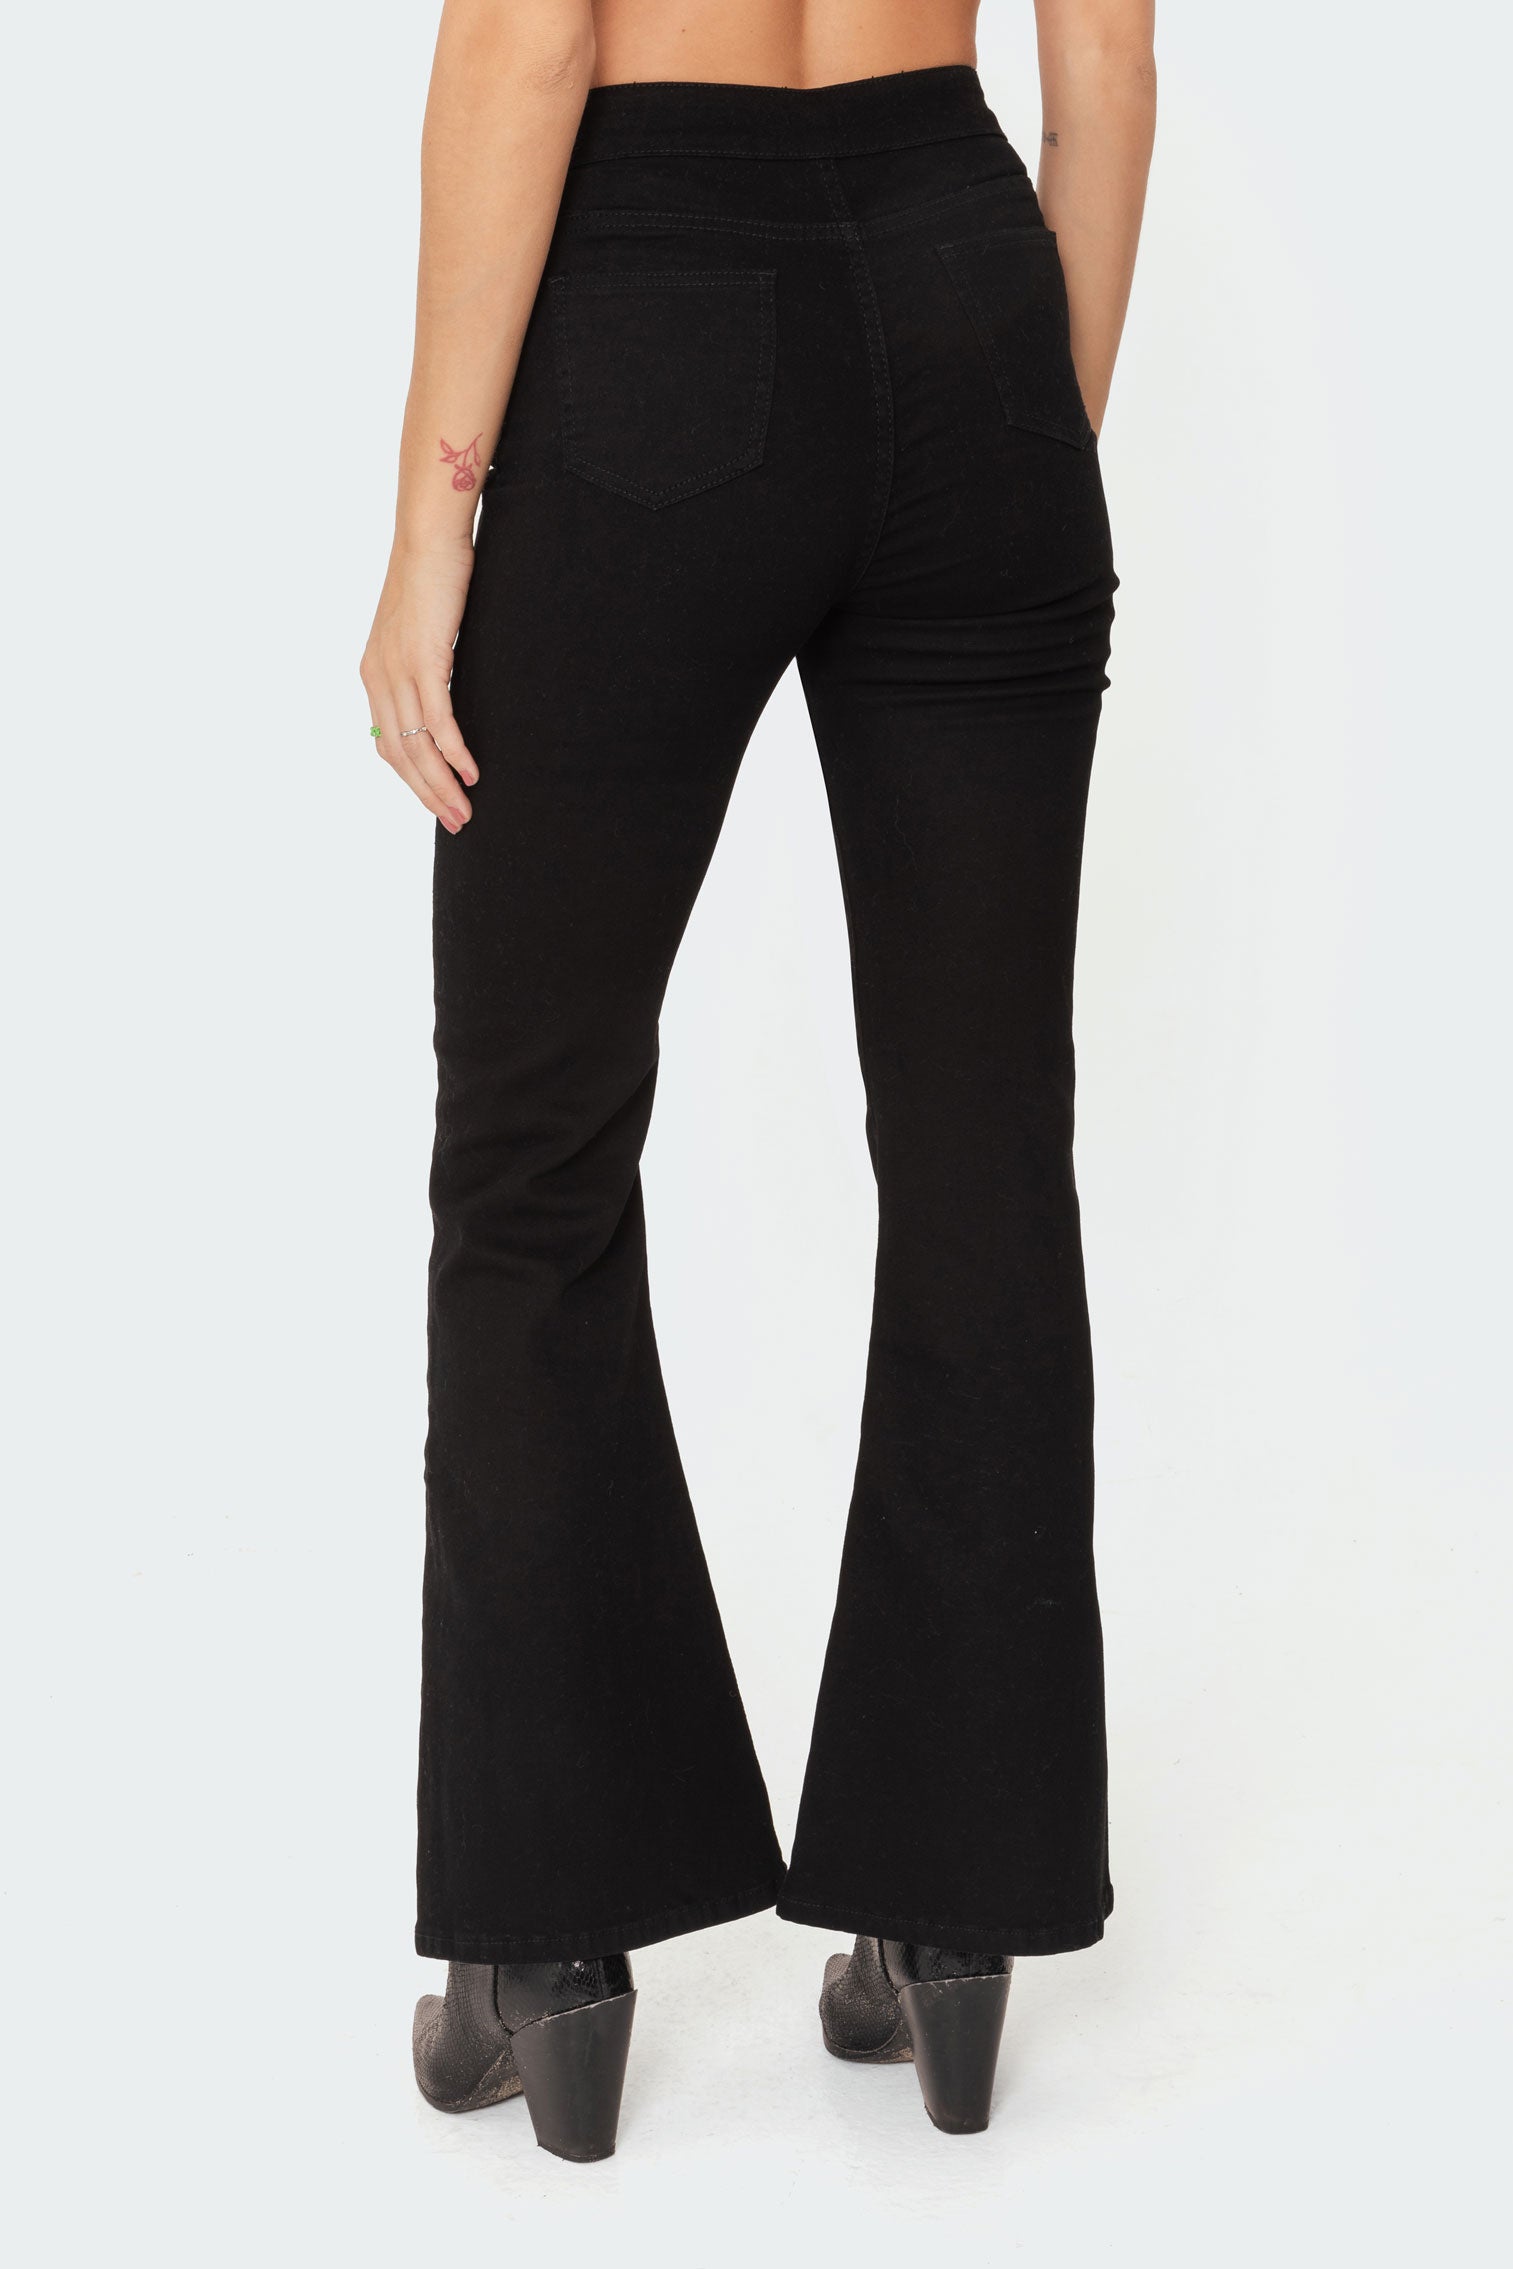 Olympia Cut-Out Flared Jeans